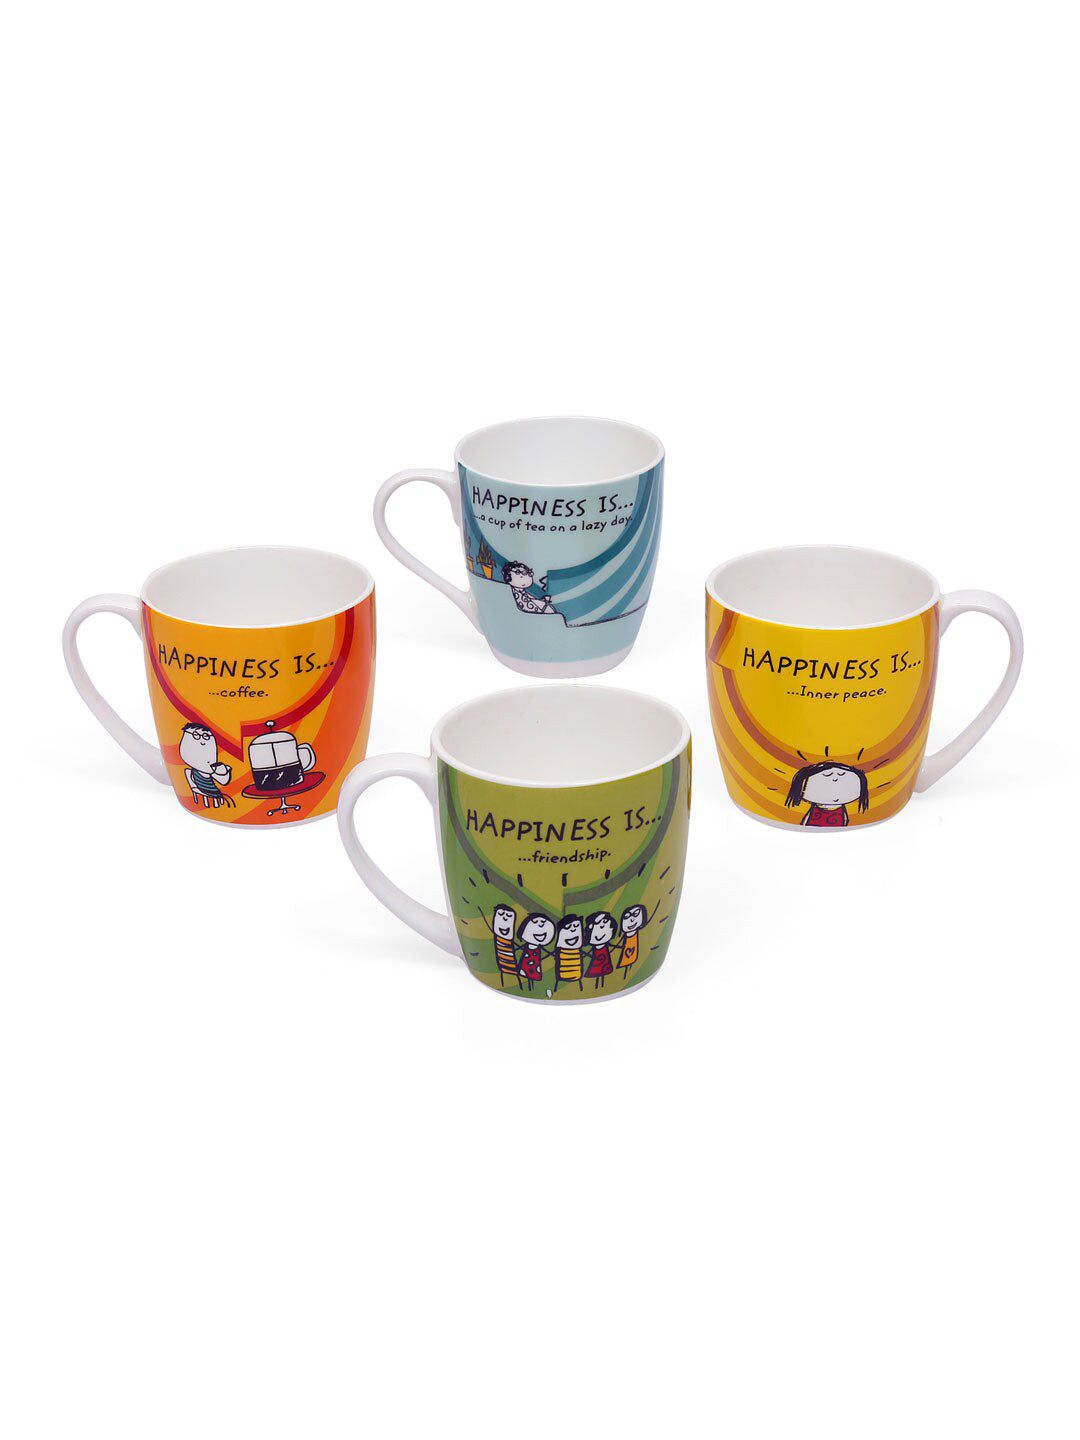 Athome by Nilkamal Green & Yellow Geometric Printed Ceramic Matte Cups Set of Cups and Mugs Price in India